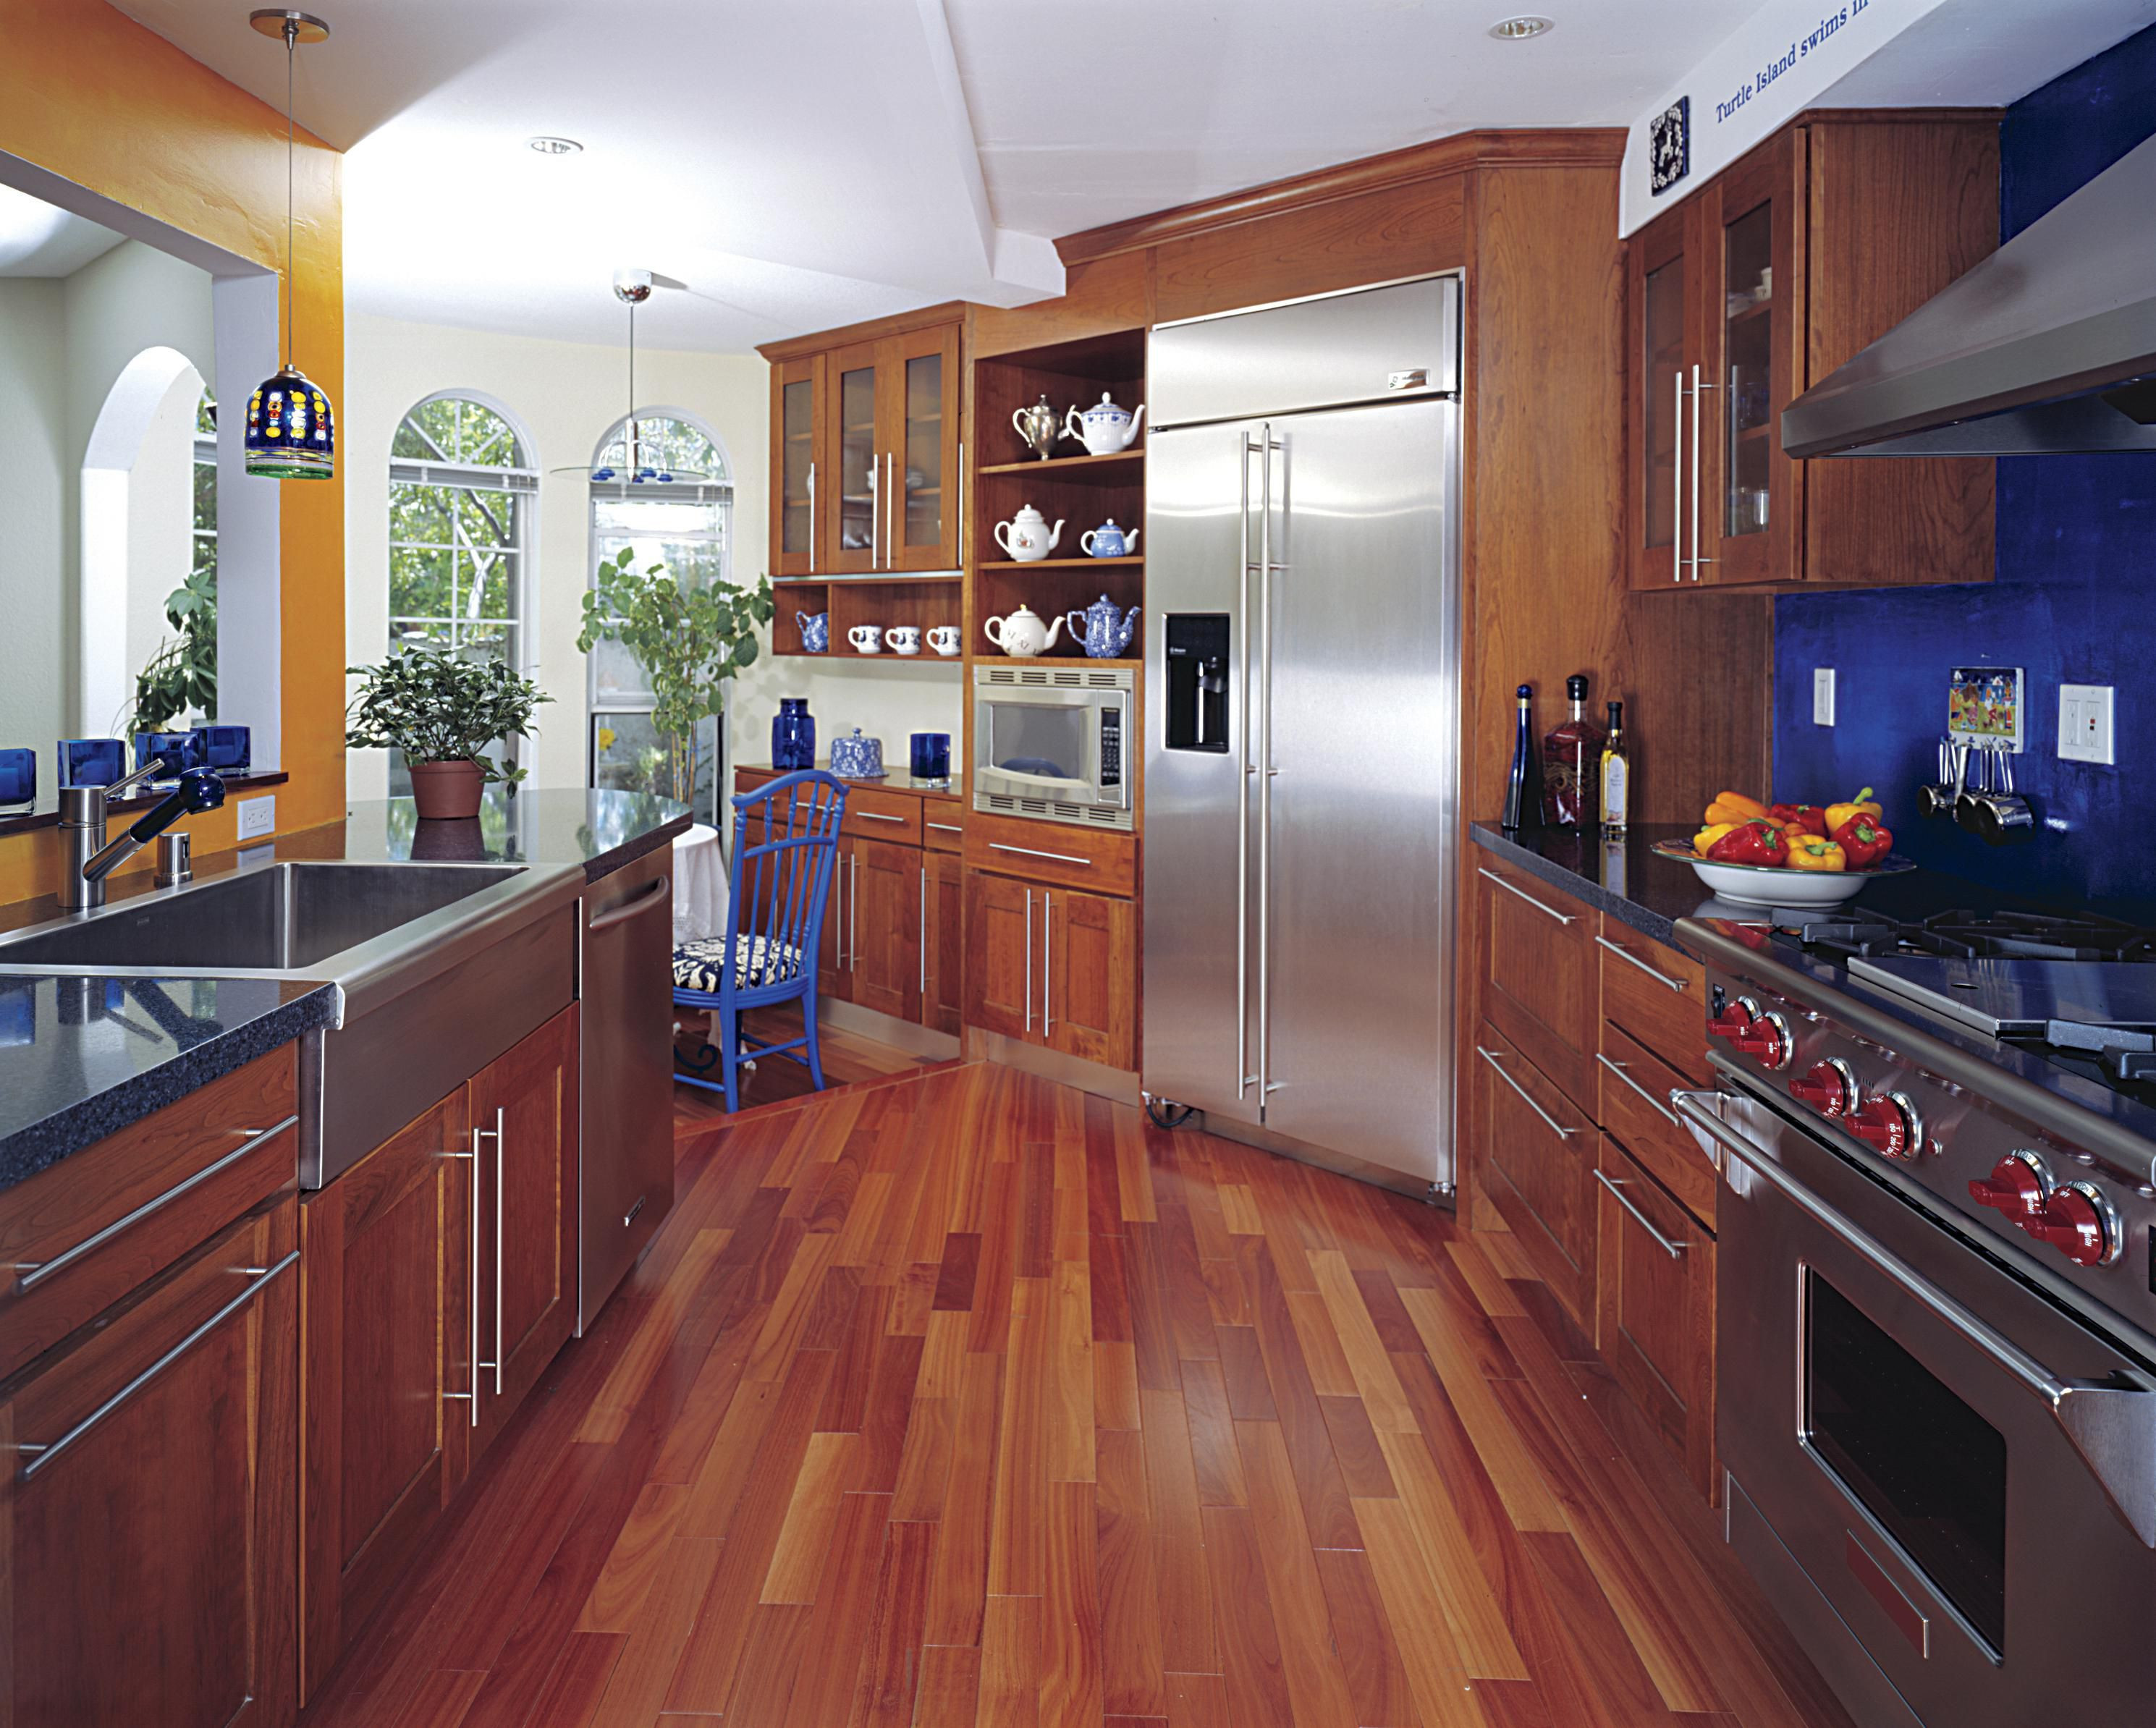 17 Cute 4 Inch Hickory Hardwood Flooring 2024 free download 4 inch hickory hardwood flooring of hardwood floor in a kitchen is this allowed with regard to 186828472 56a49f3a5f9b58b7d0d7e142